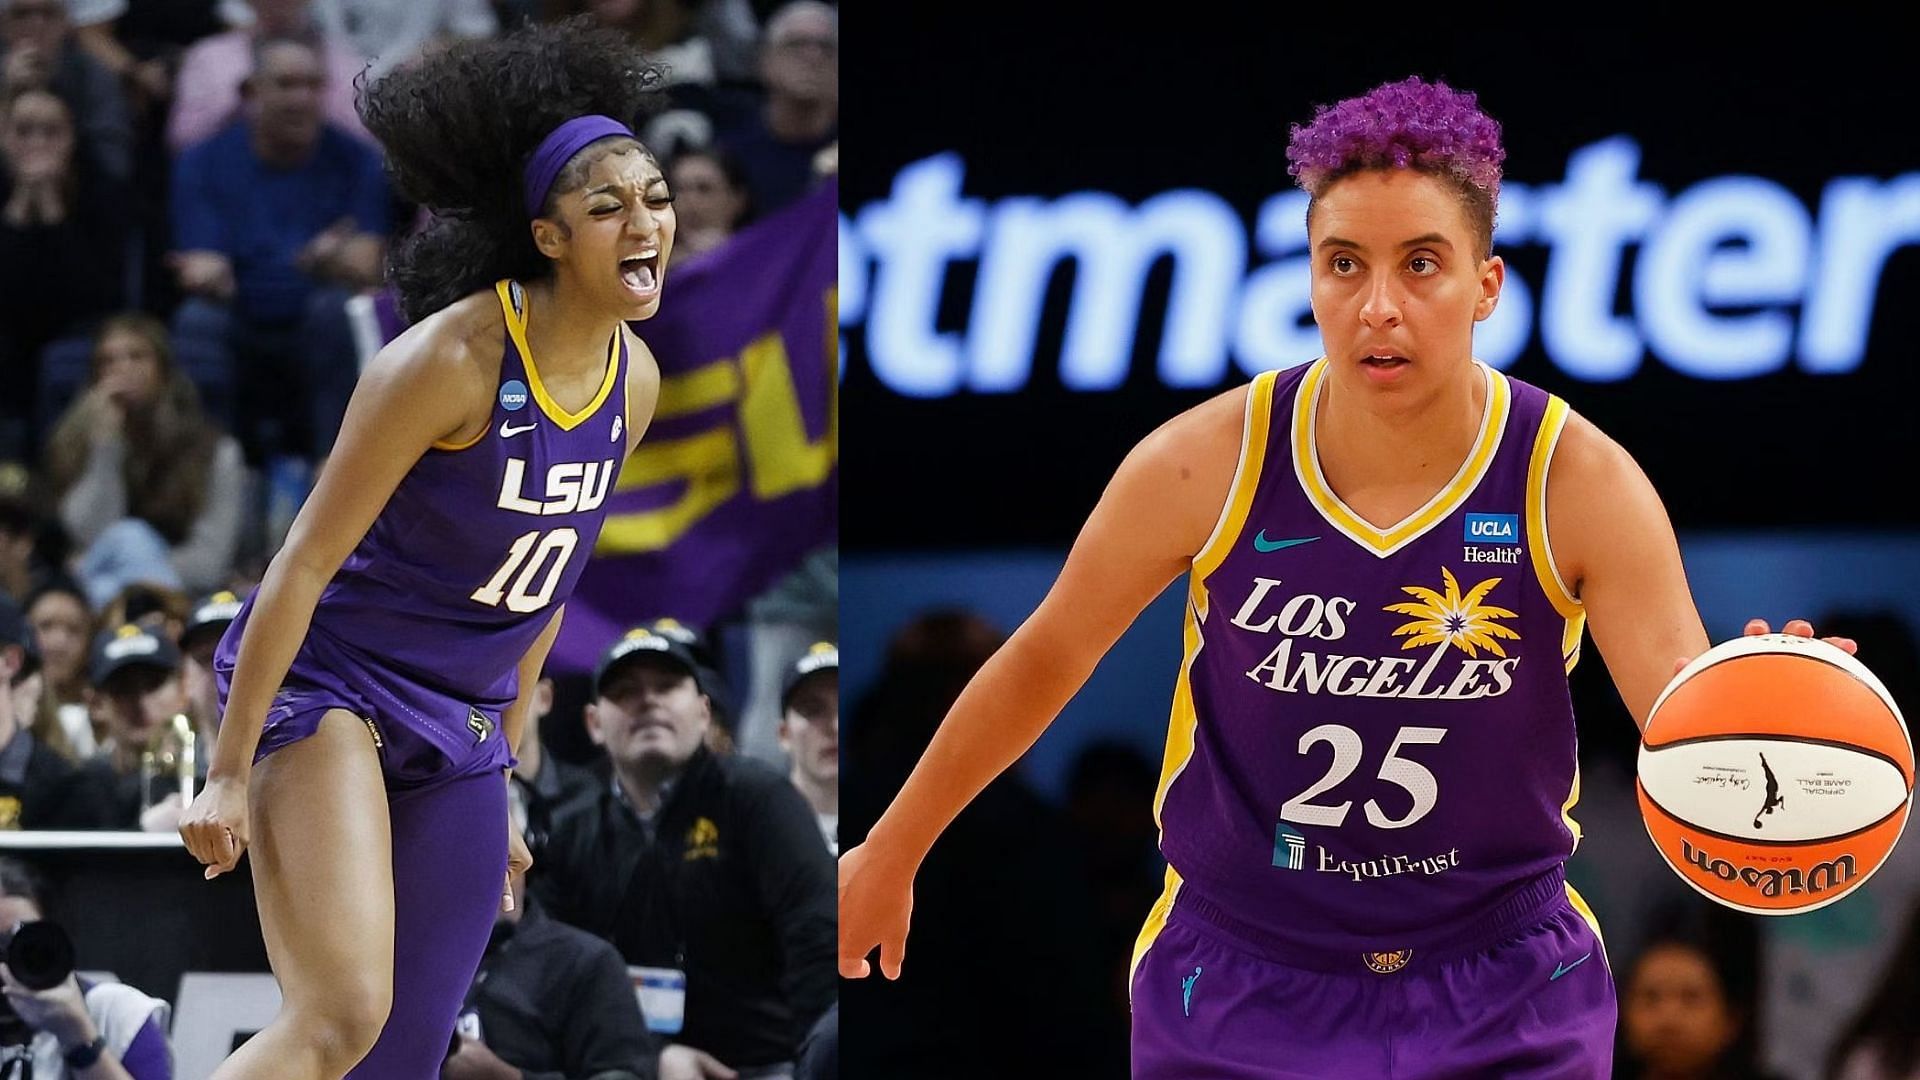 LSU Tigers forward Angel Reese (right) and LA Sparks guard Layshia Clarendon (left)